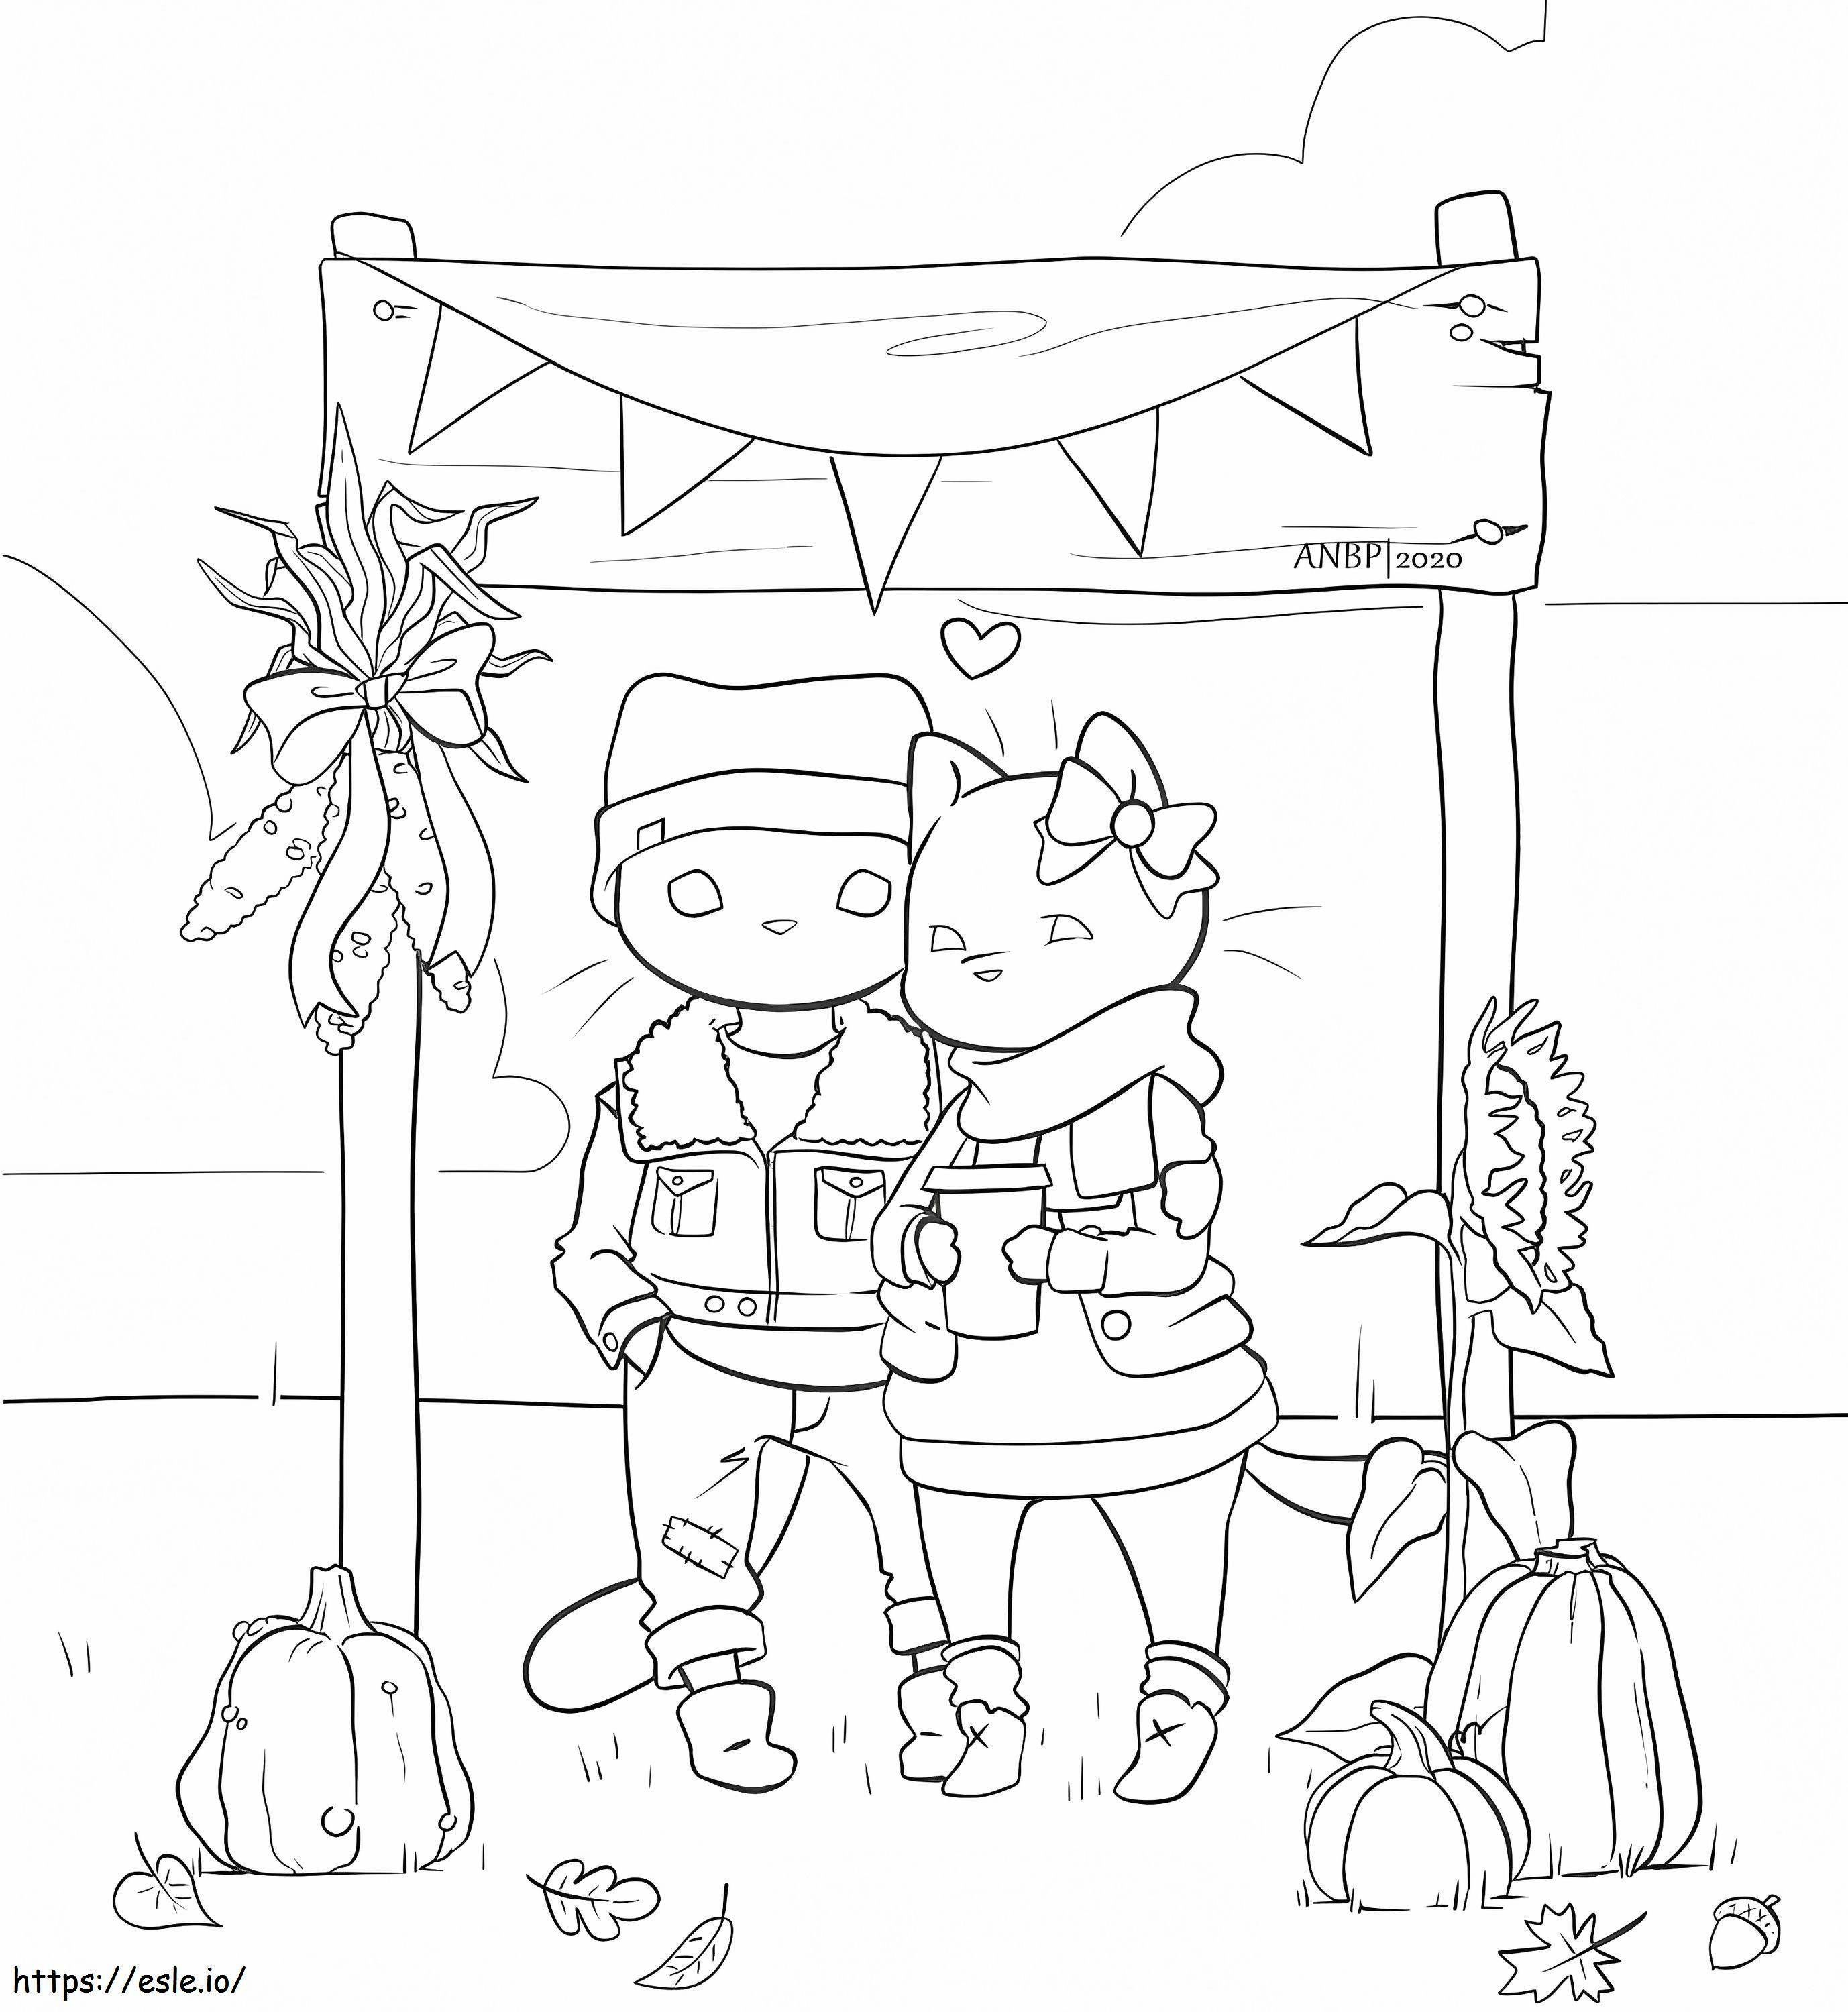 Cute Cats In Clothes coloring page